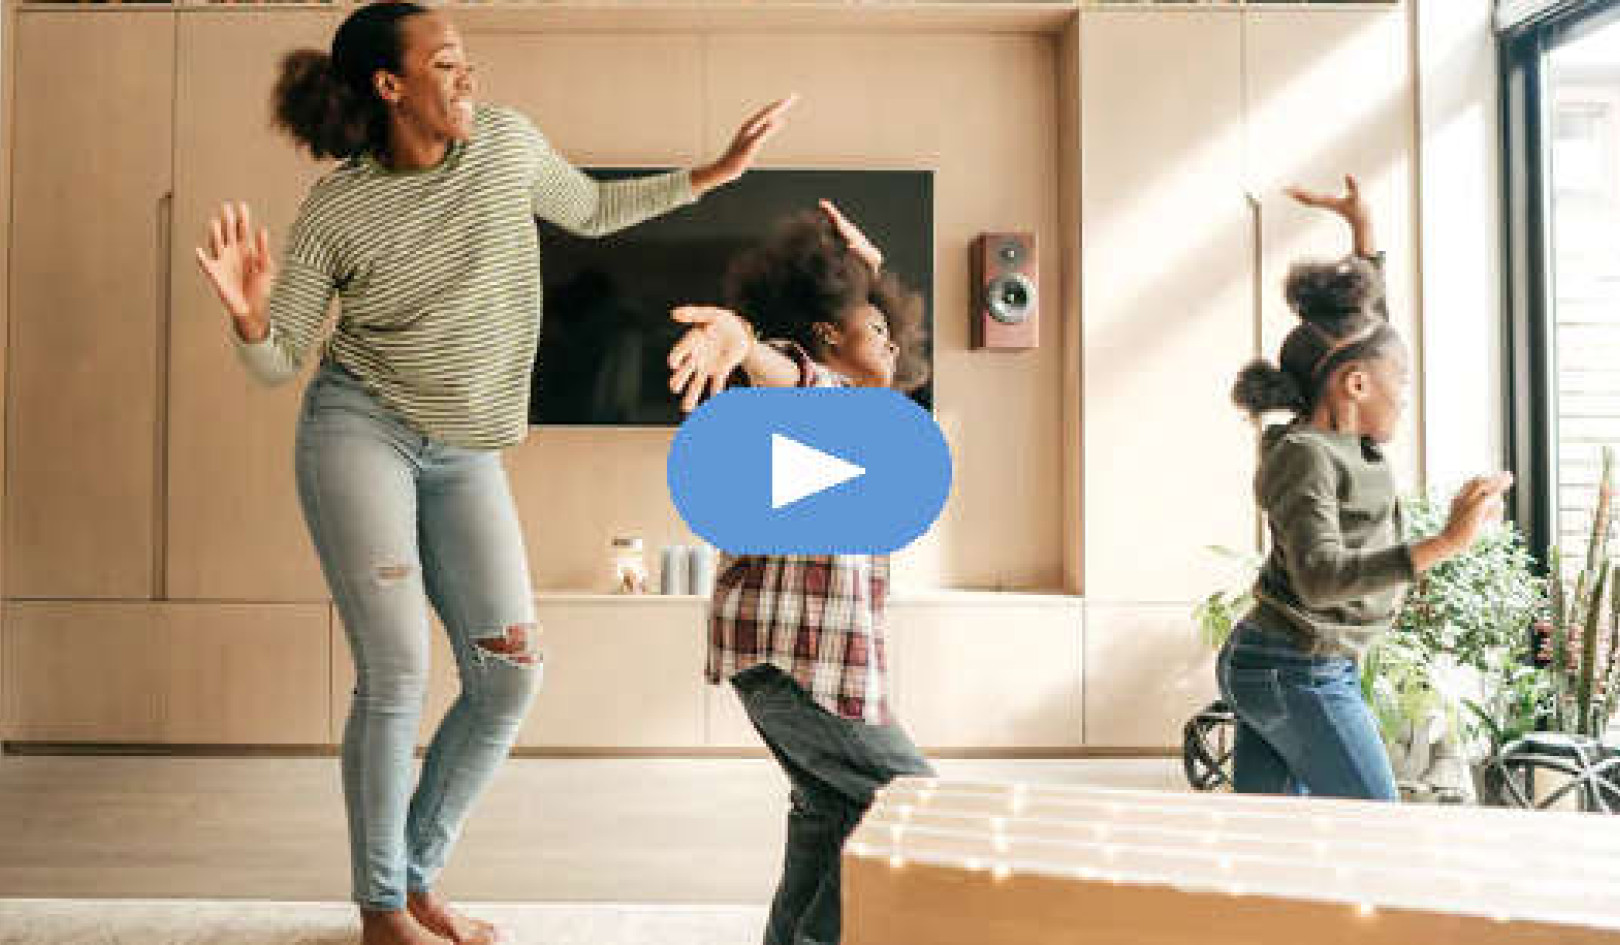 Can You Dance Away Your Anxiety, Depression and Deeper Psychological Wounds? (Video)